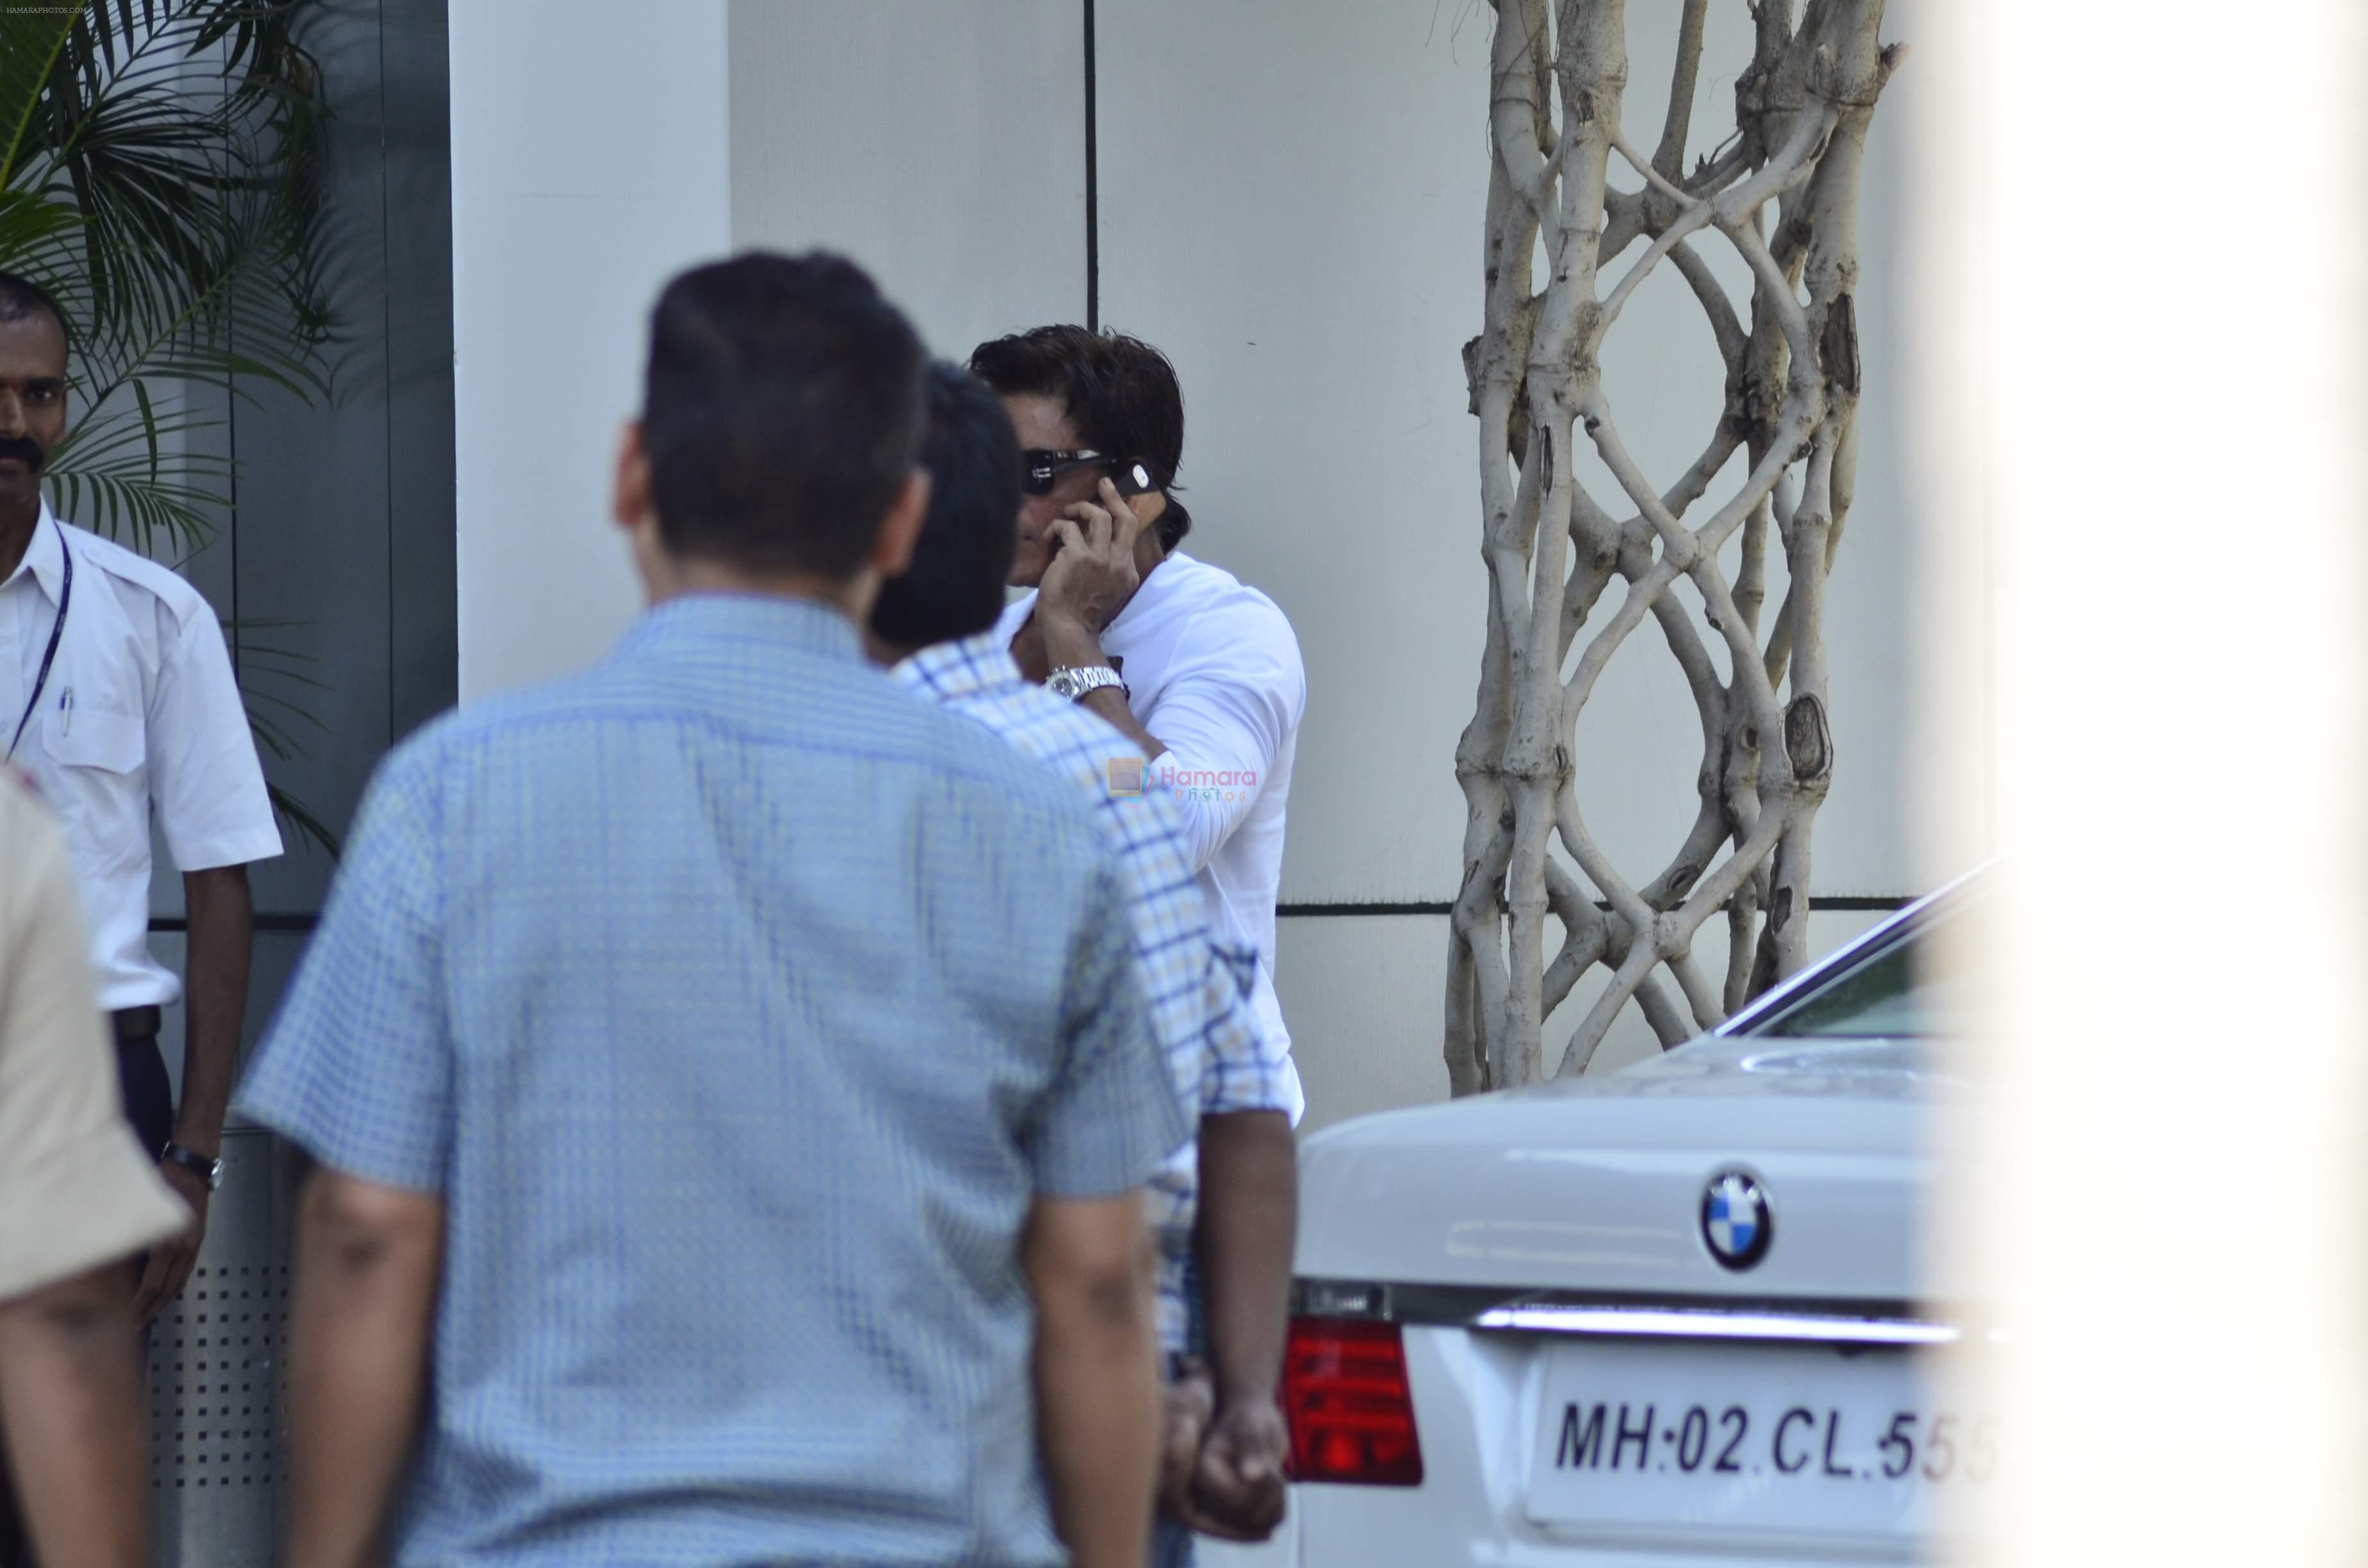 Shahrukh Khan snapped at airport as he leave for ipl finals in Mumbai on 1st June 2014